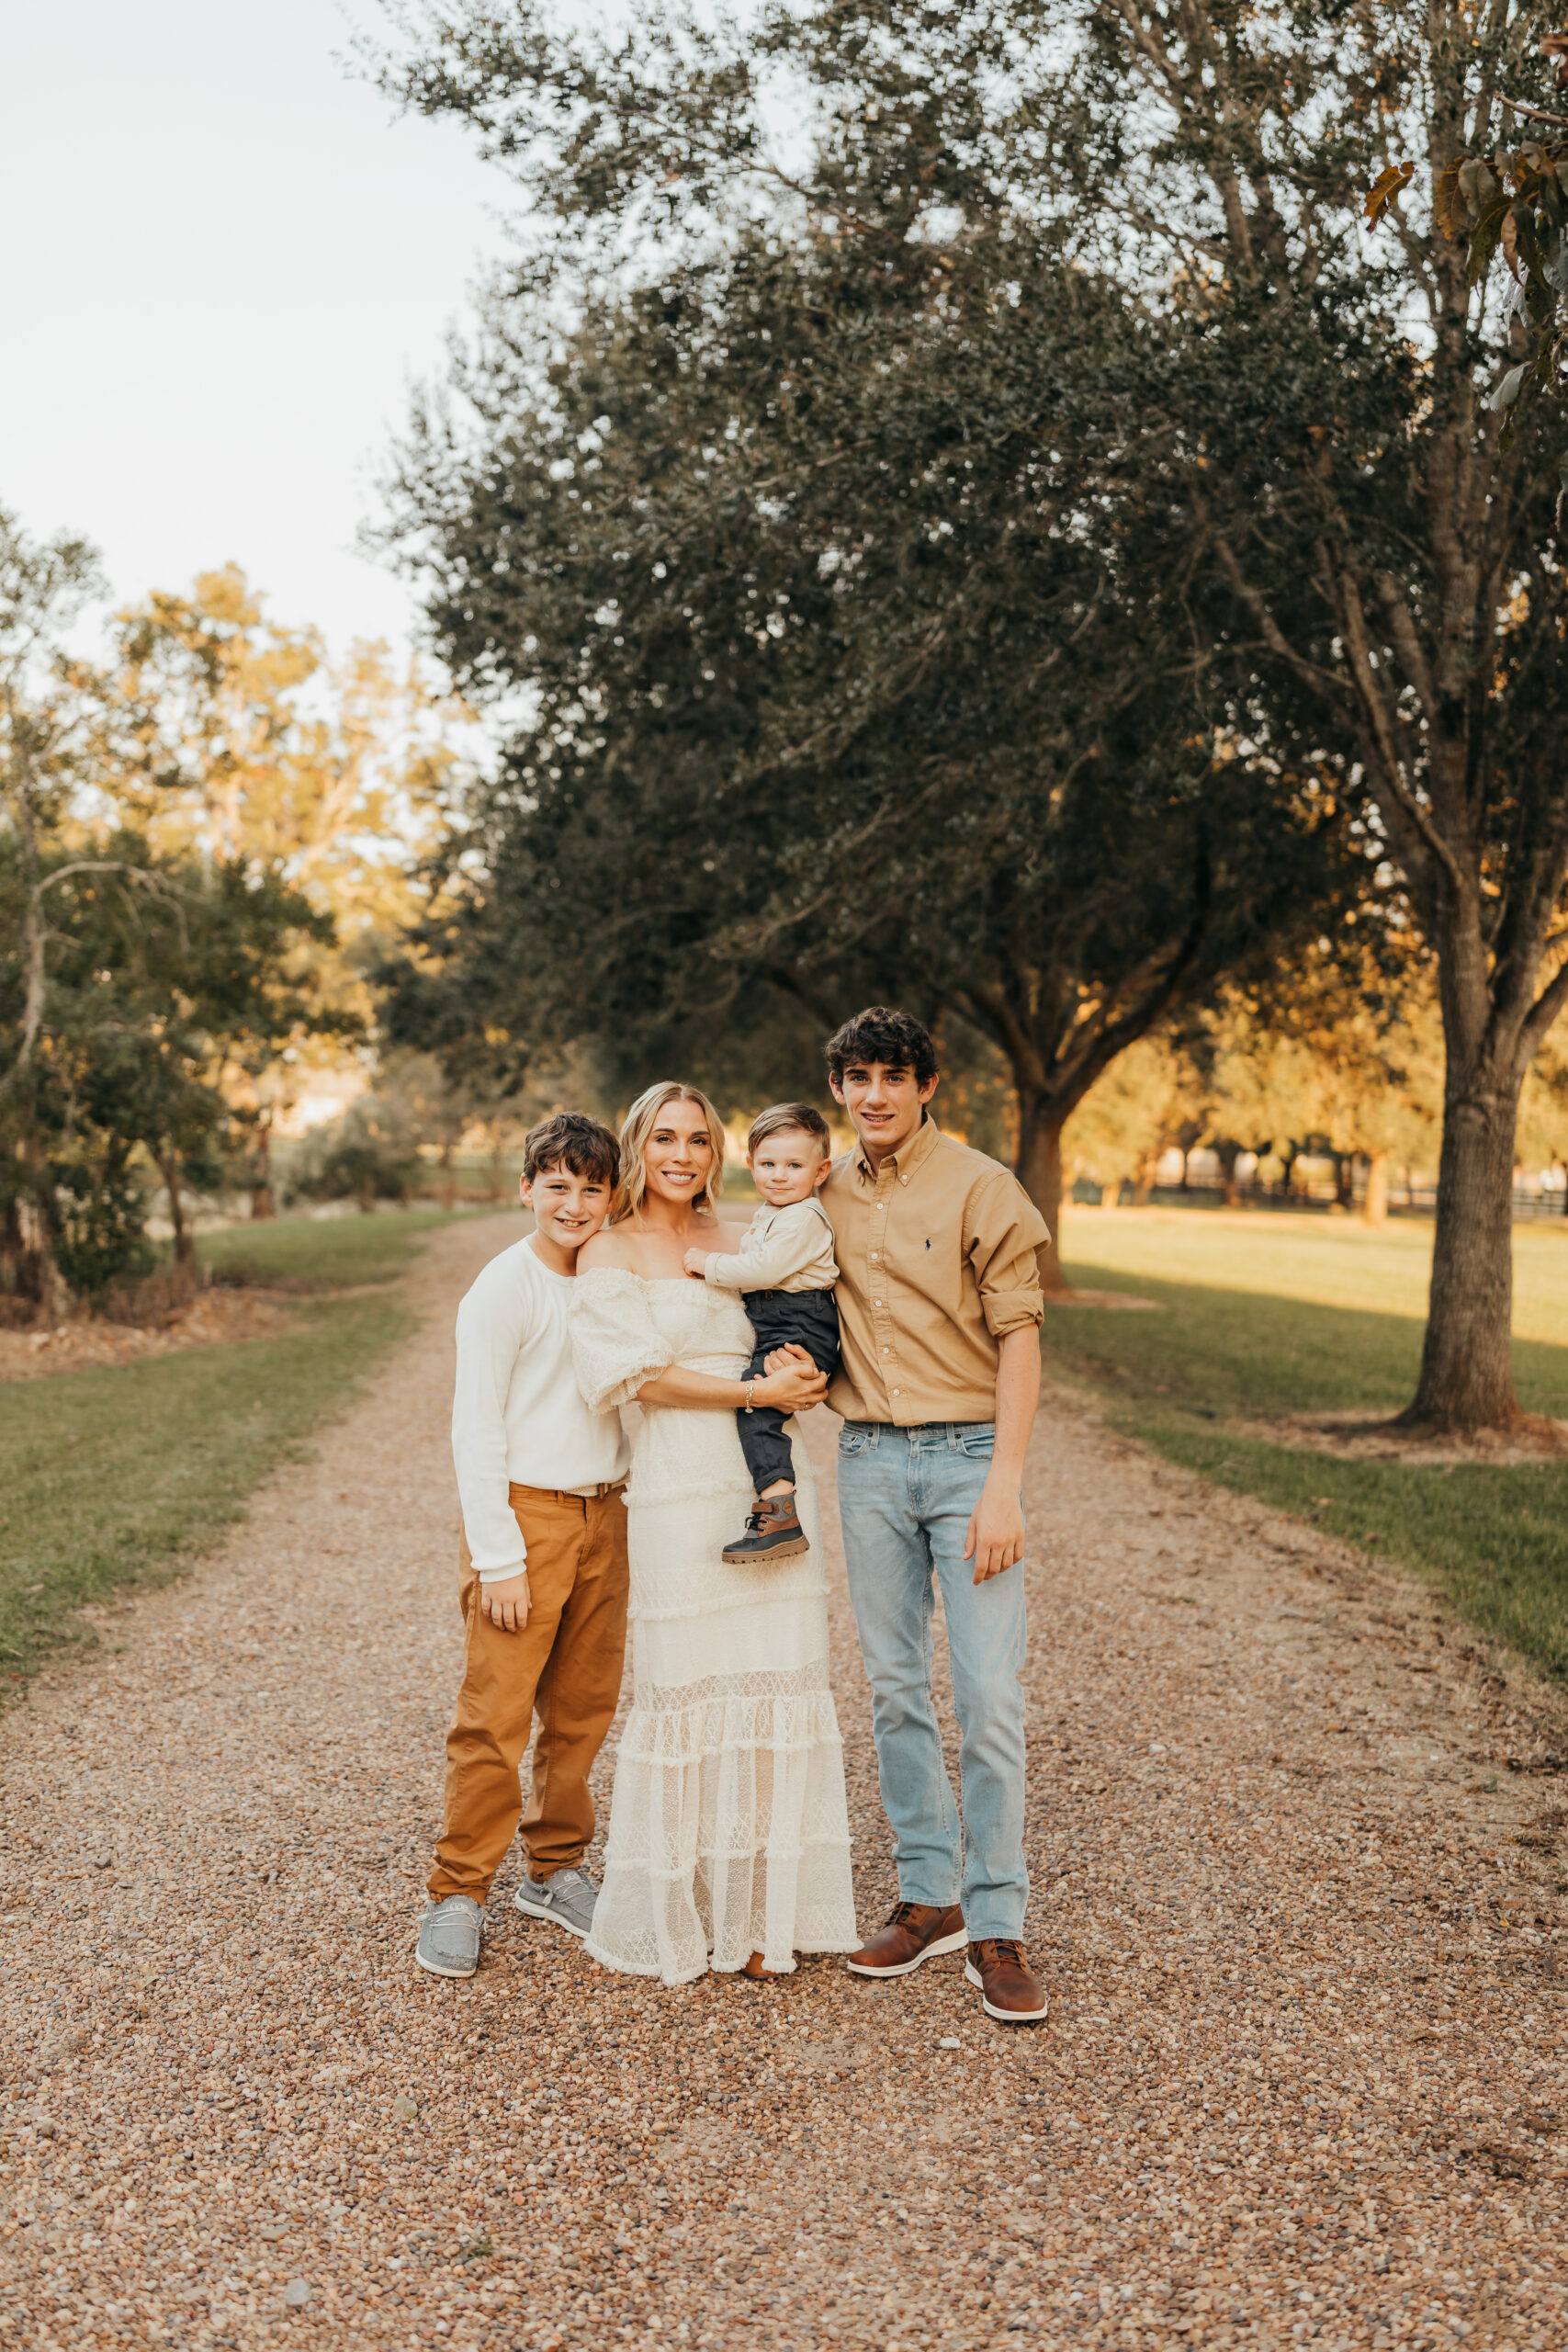 Choose a family photographer with the tips this family followed.